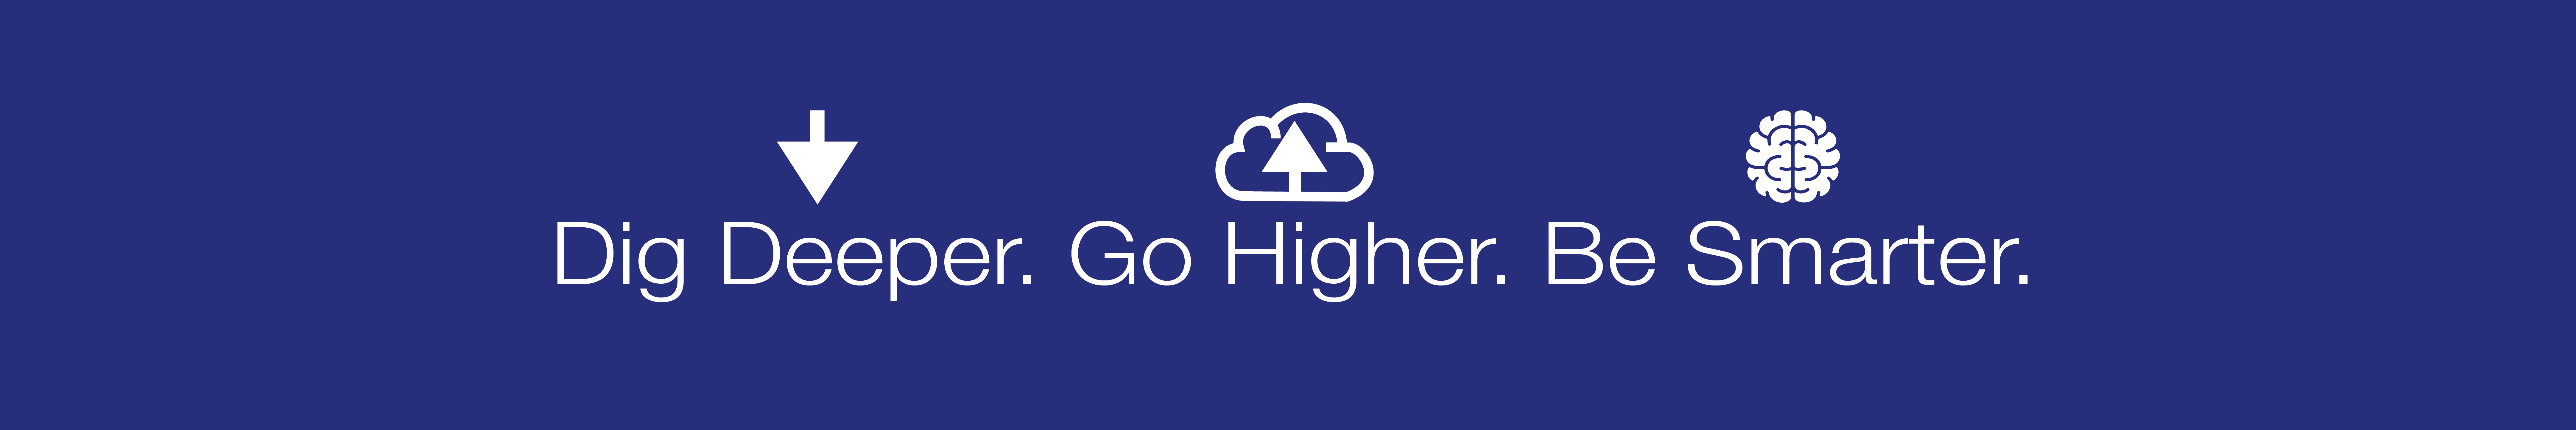 Dig deeper, go higher, be smarter with cloud consulting from WIN Digital Solutions.